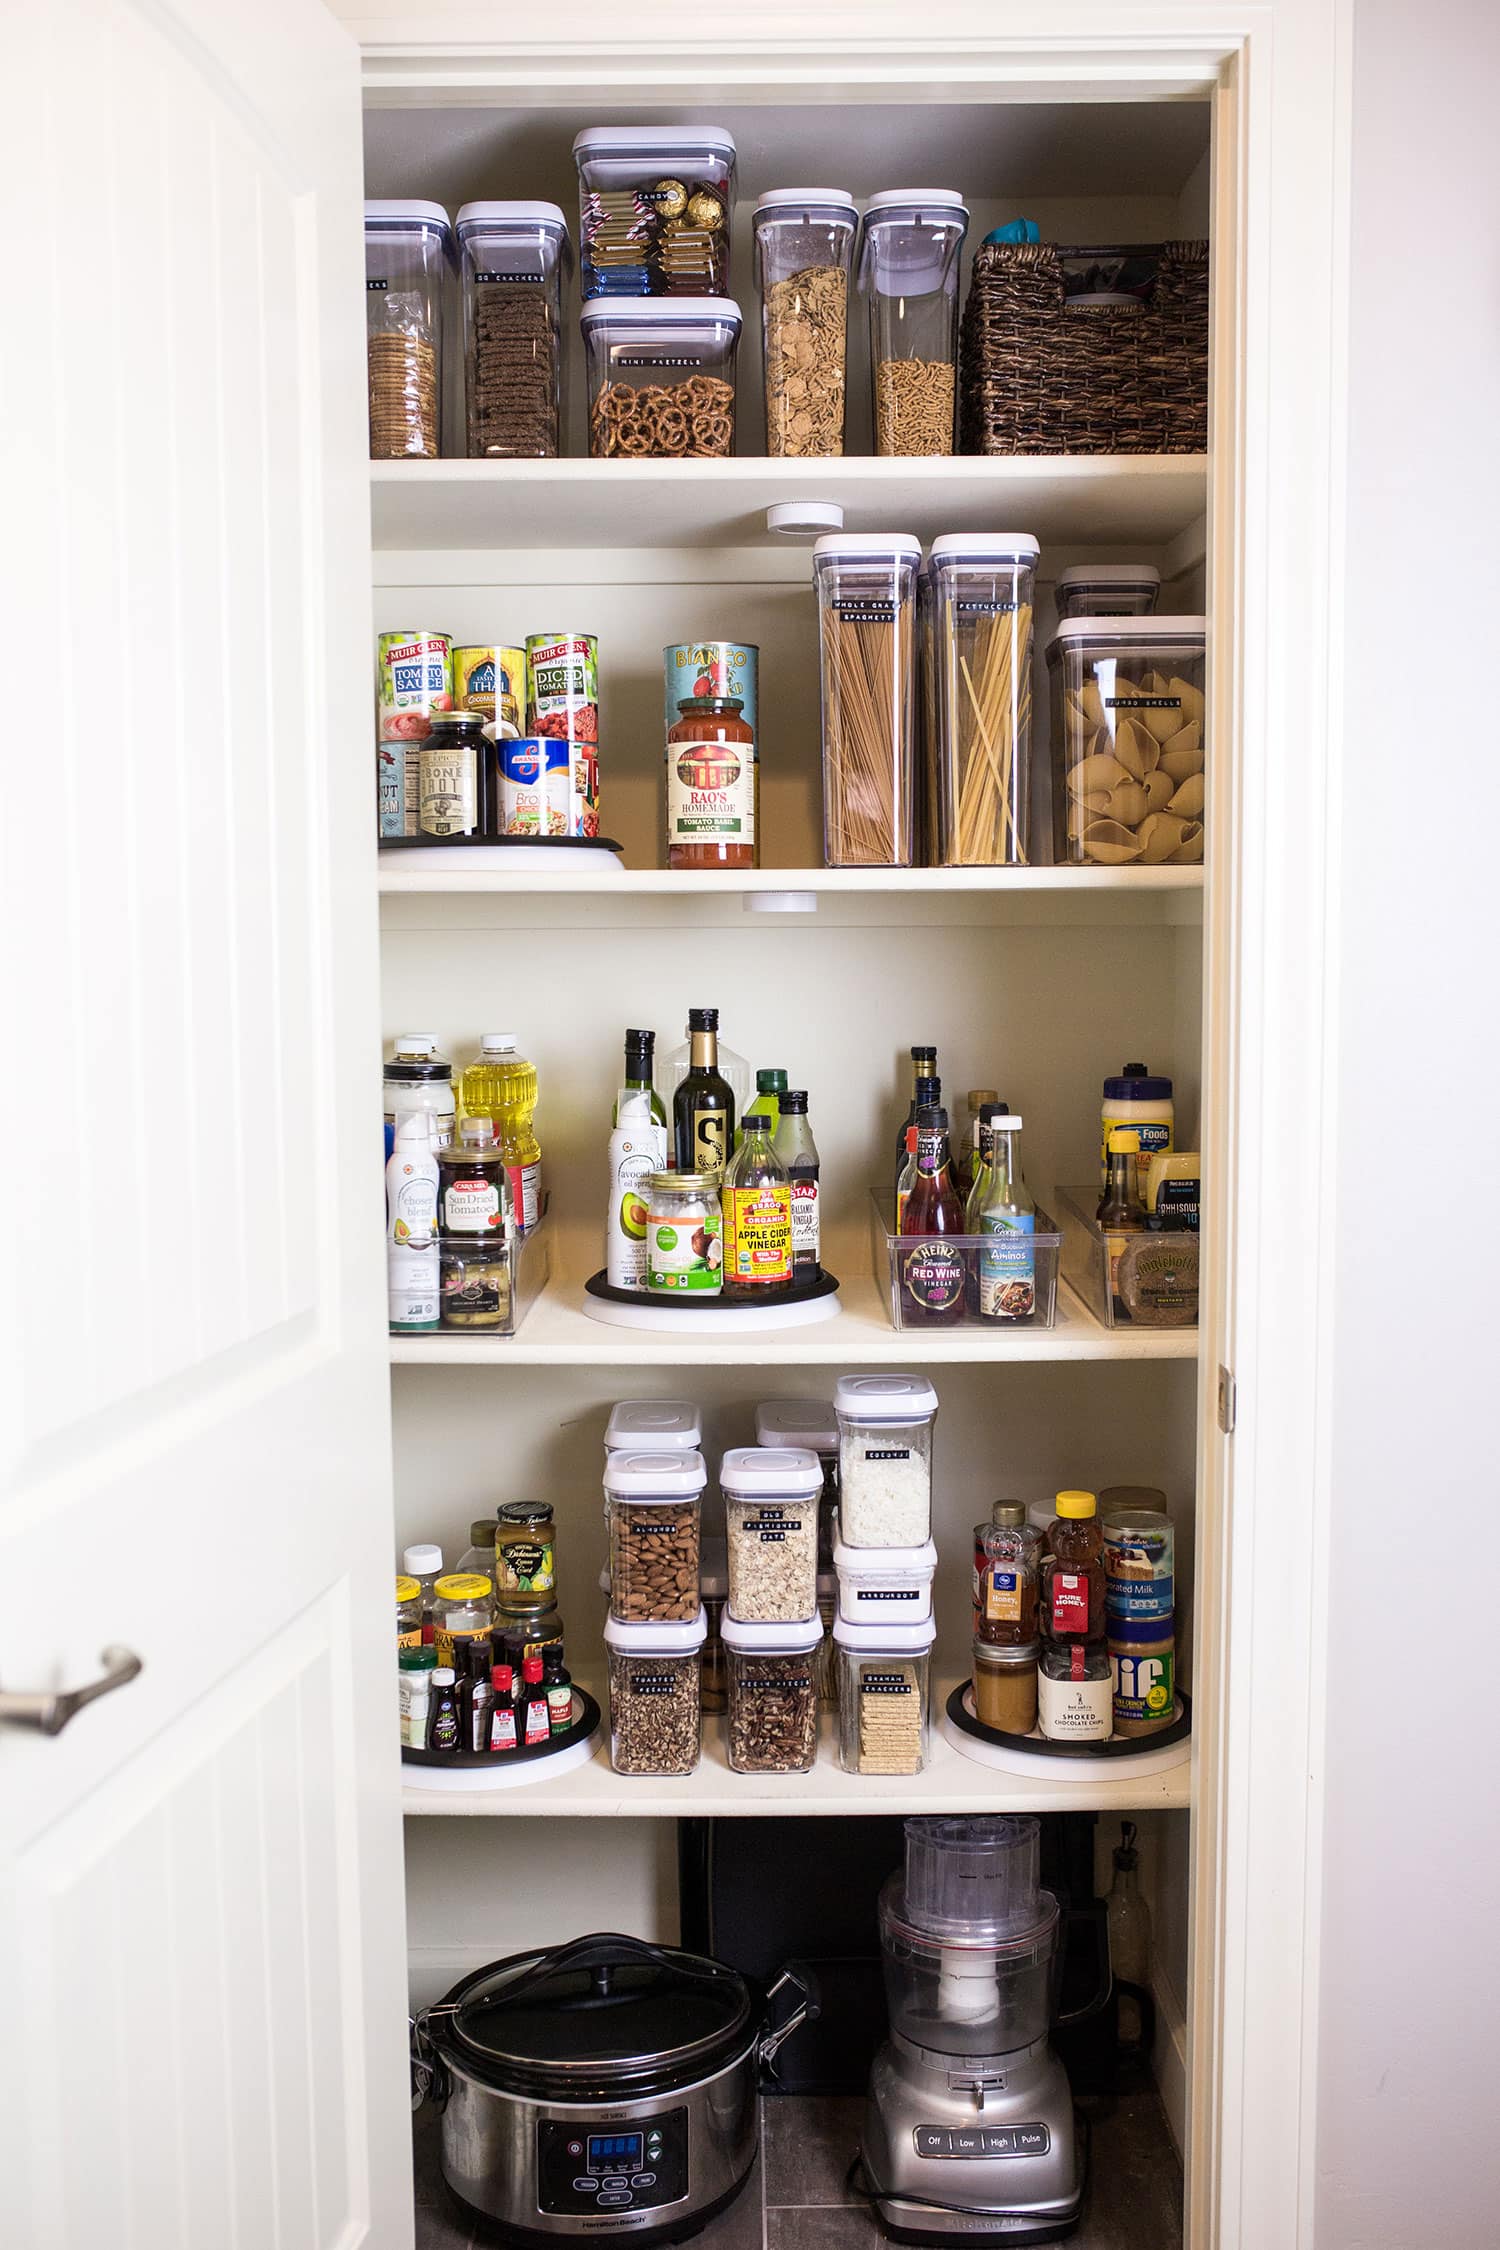 https://handletheheat.com/wp-content/uploads/2018/01/How-to-Organize-Your-Pantry.jpg